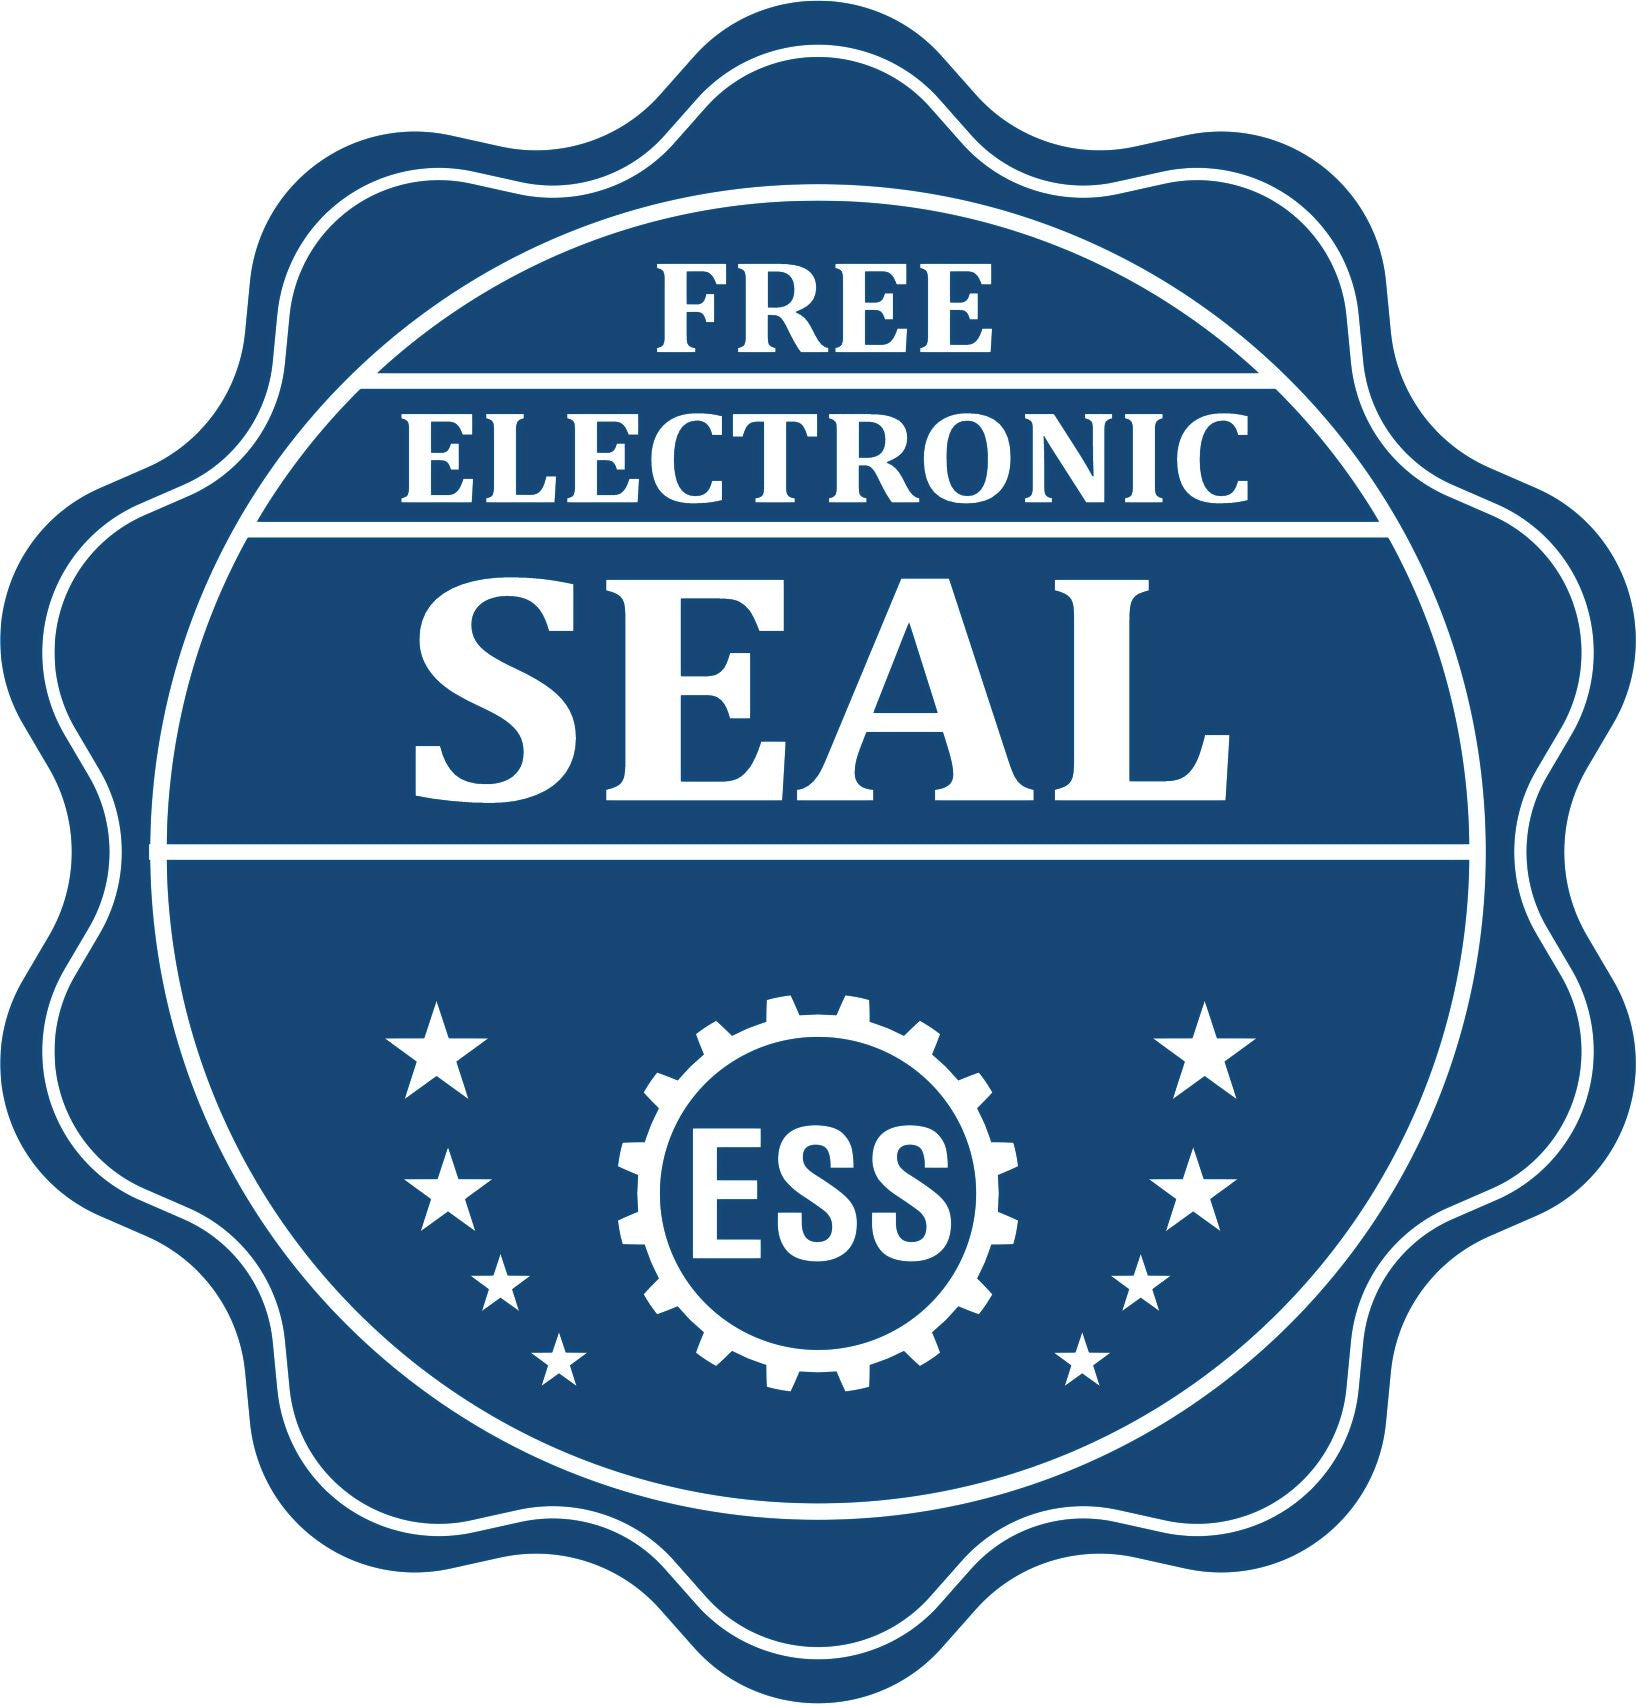 A badge showing a free electronic seal for the Heavy Duty Cast Iron West Virginia Geologist Seal Embosser with stars and the ESS gear on the emblem.